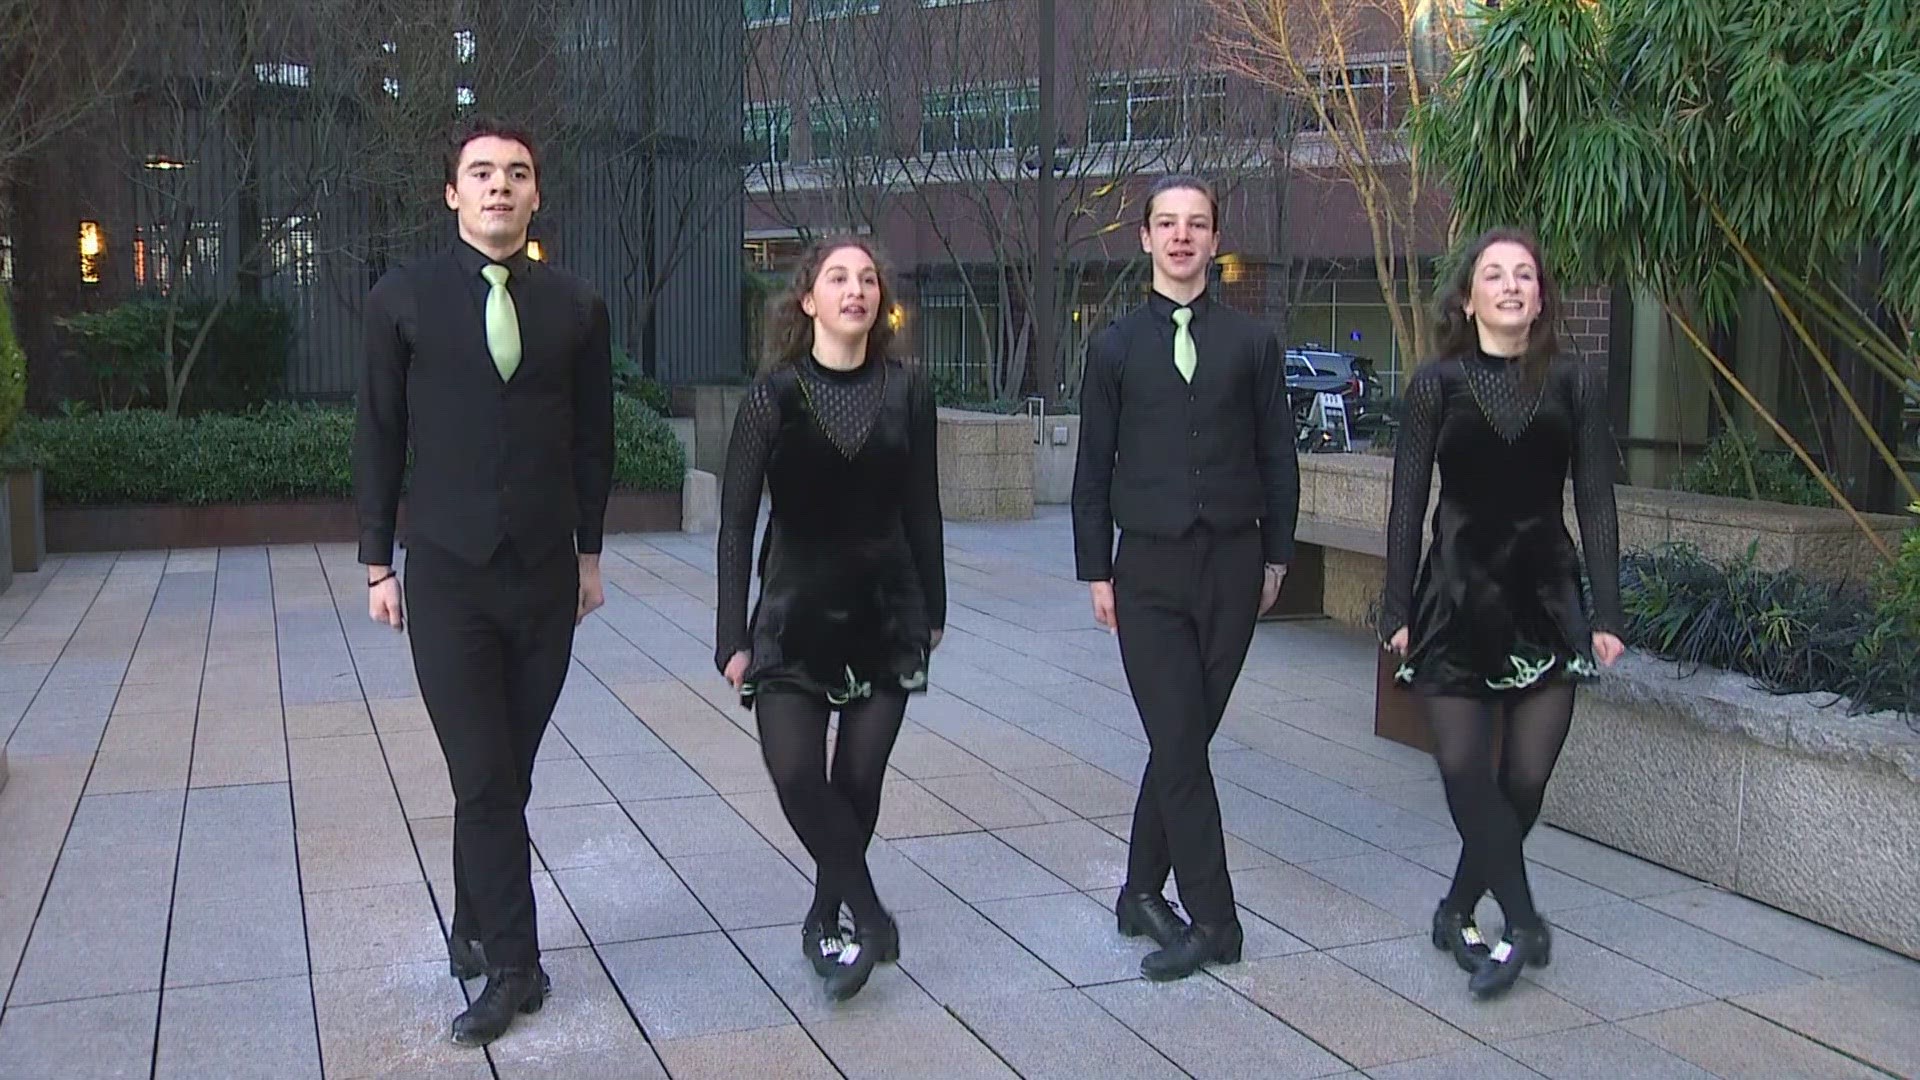 The Irish Heritage Club Seattle is gearing up for the St. Patrick's Day weekend but shares with KING 5 that it is working year-round to offer several cultural events